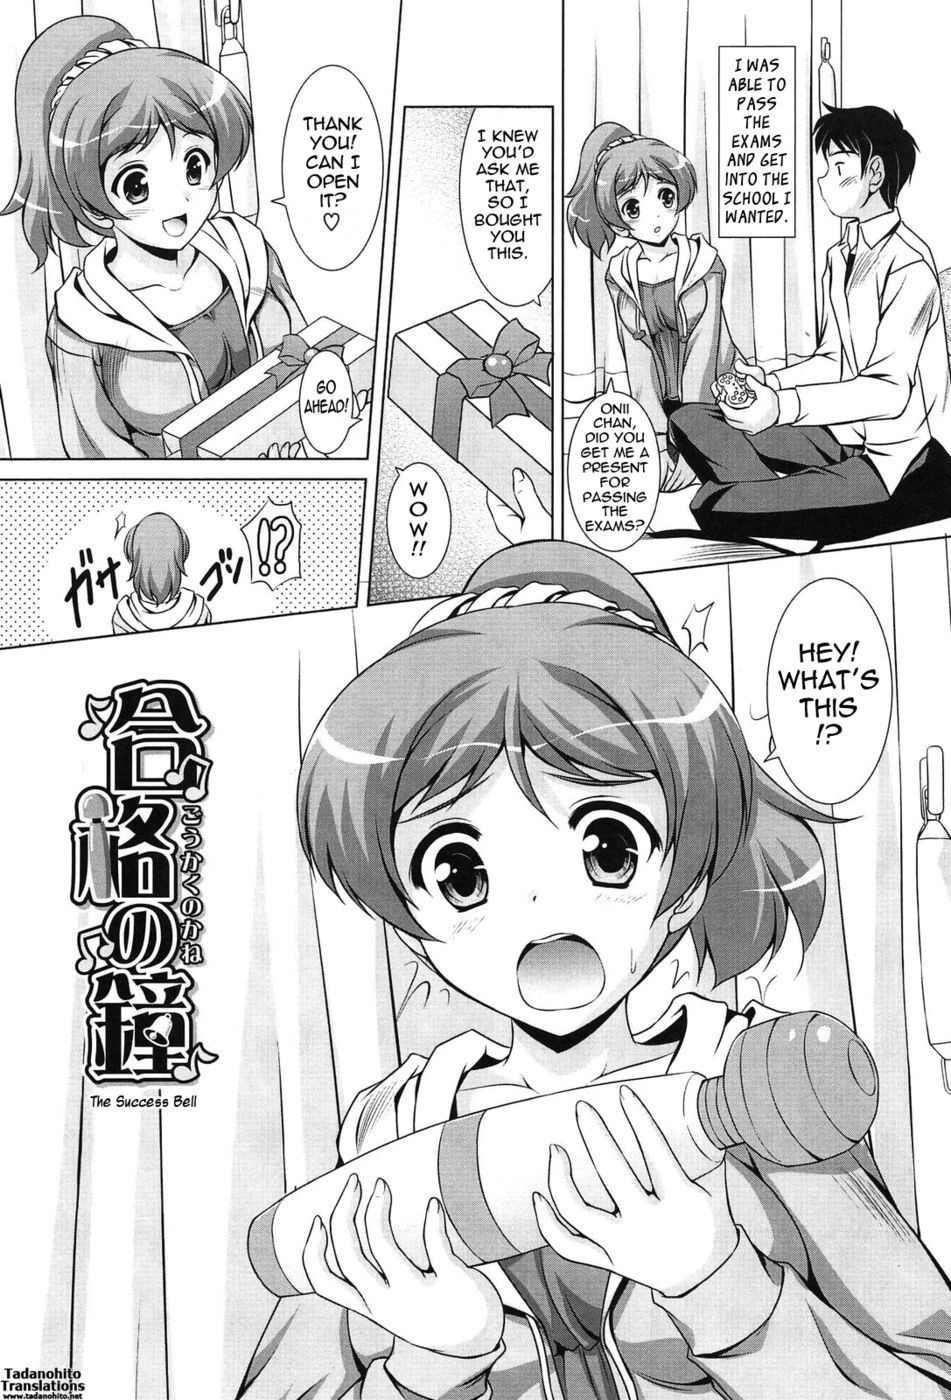 Hentai Manga Comic-Younger Girls Celebration-Chapter 3 - The Success Bell-1